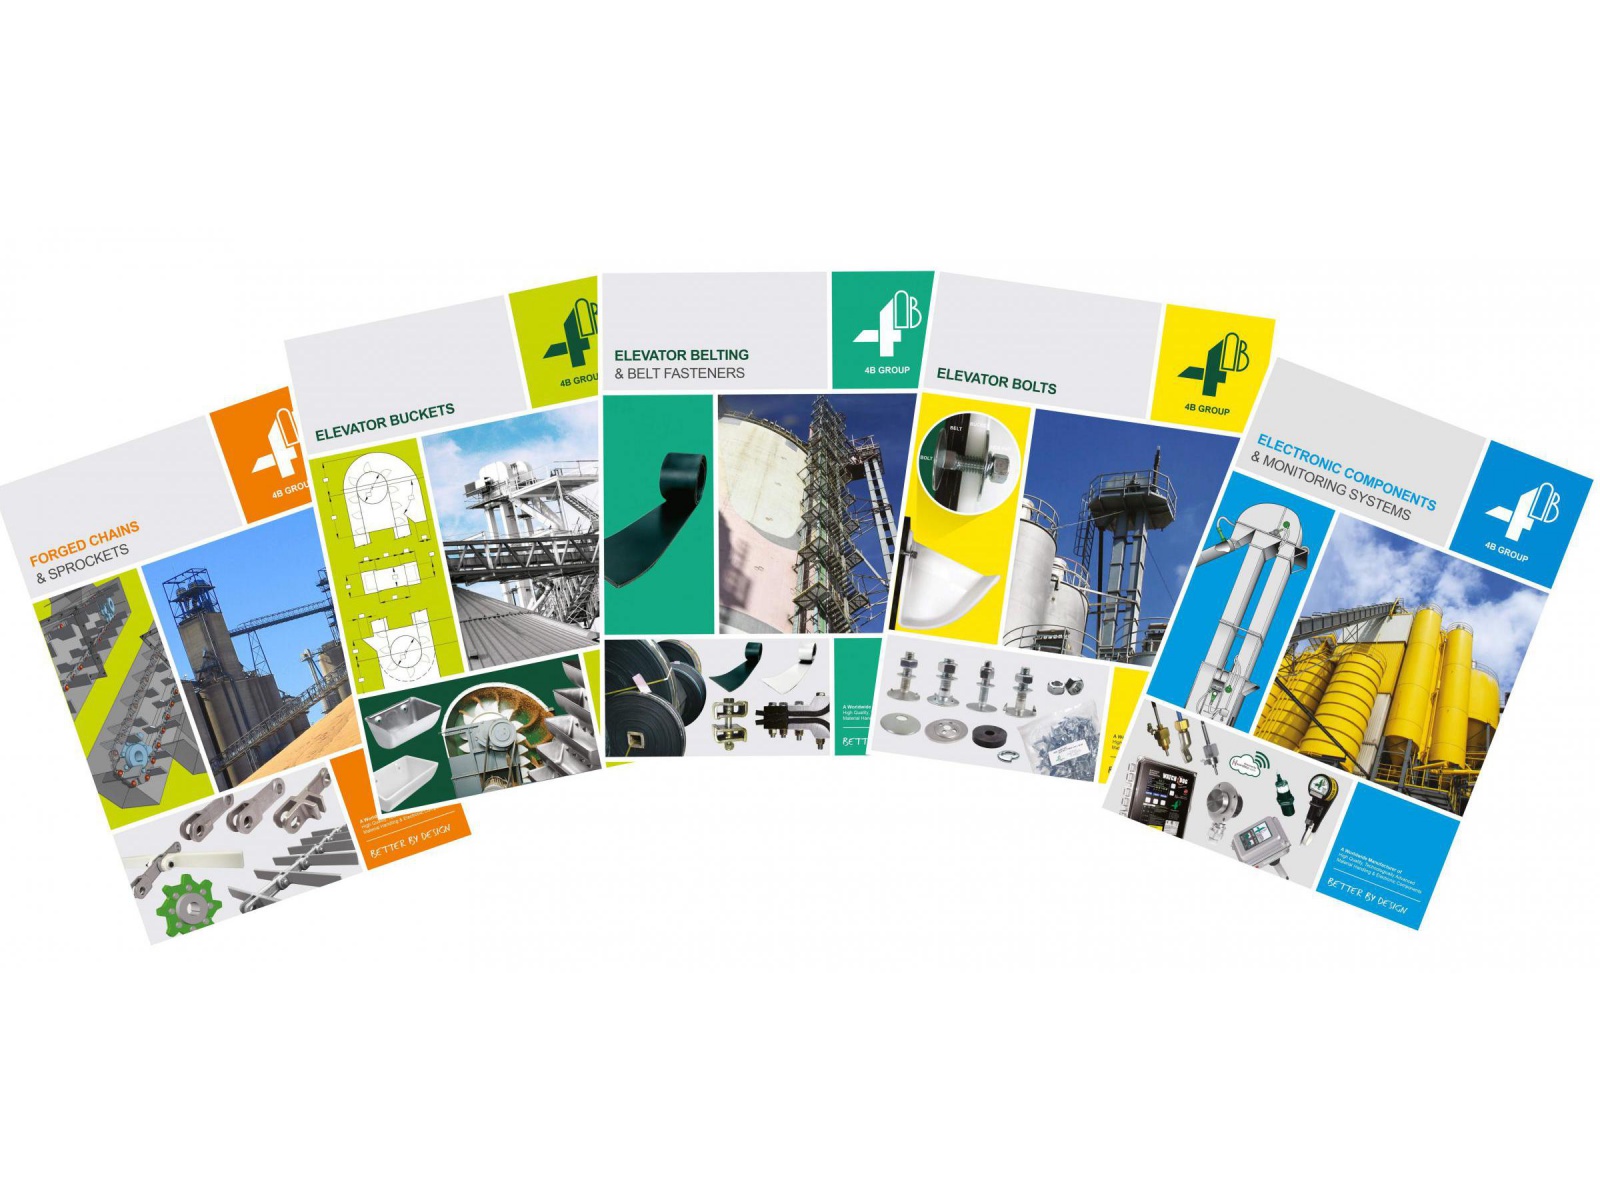 New 4B Catalogues - Elevator & Conveyor Components 4B's new catalogues now available - conveying and monitoring components